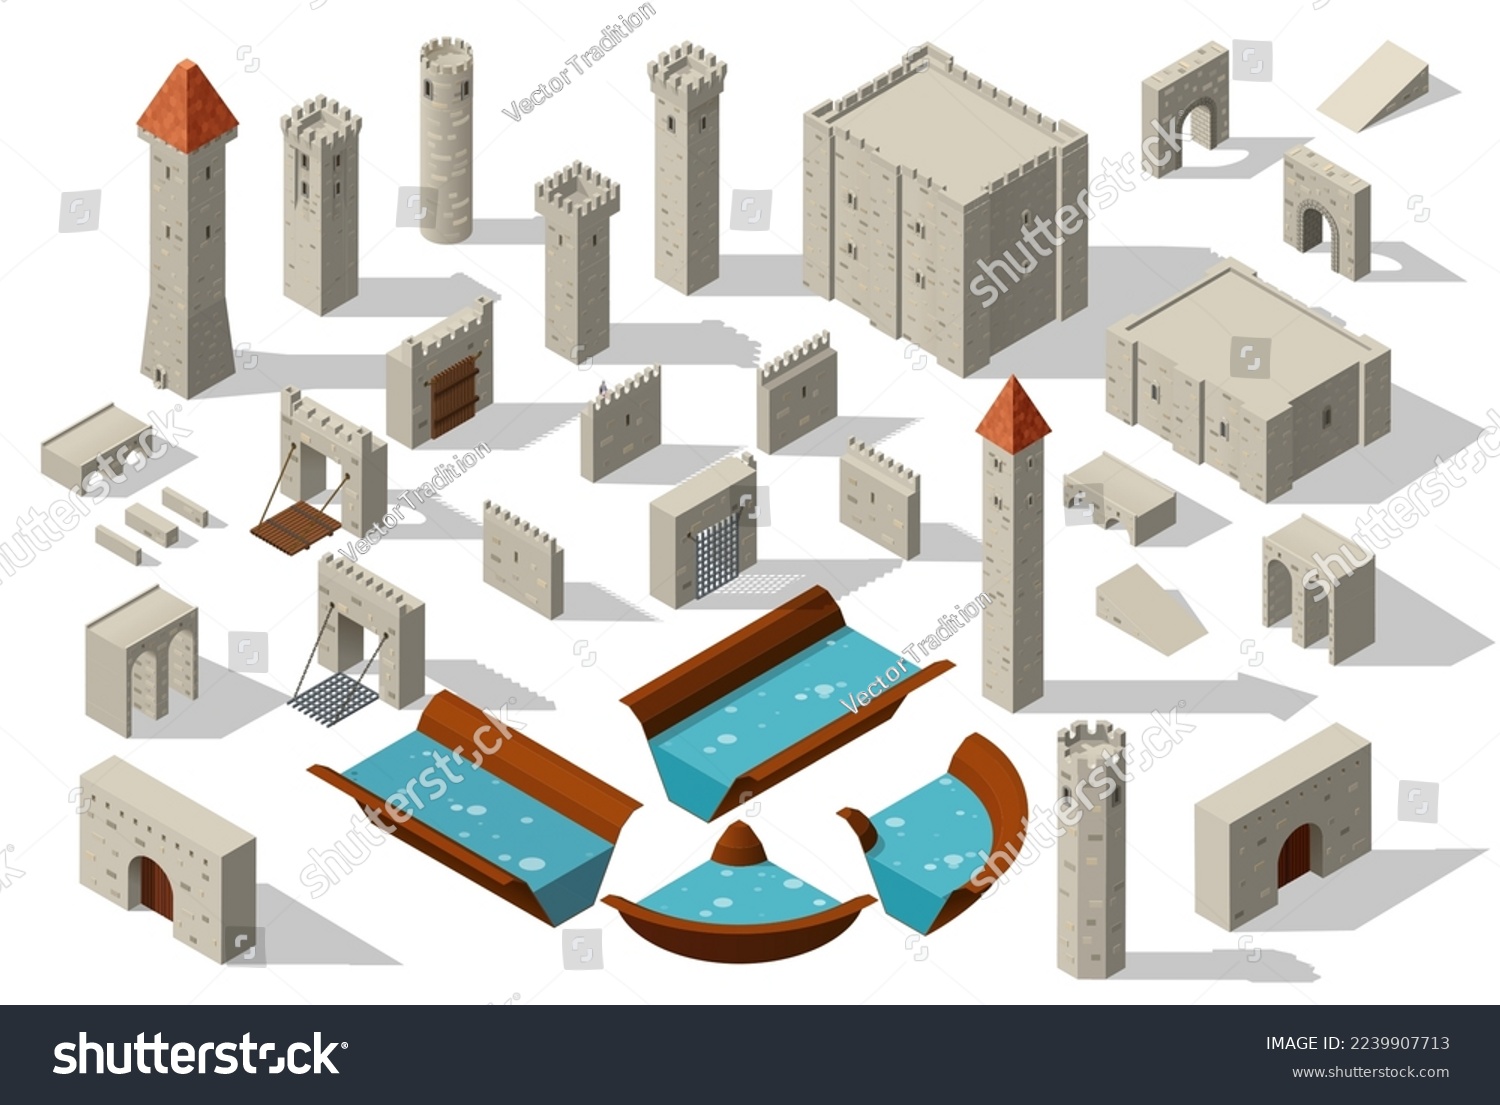 SVG of Isometric castle tower with wall bridge and moat, vector fortress building. Medieval fort constructor or ancient castle and citadel palace architecture elements of fortification wall, tower and gates svg